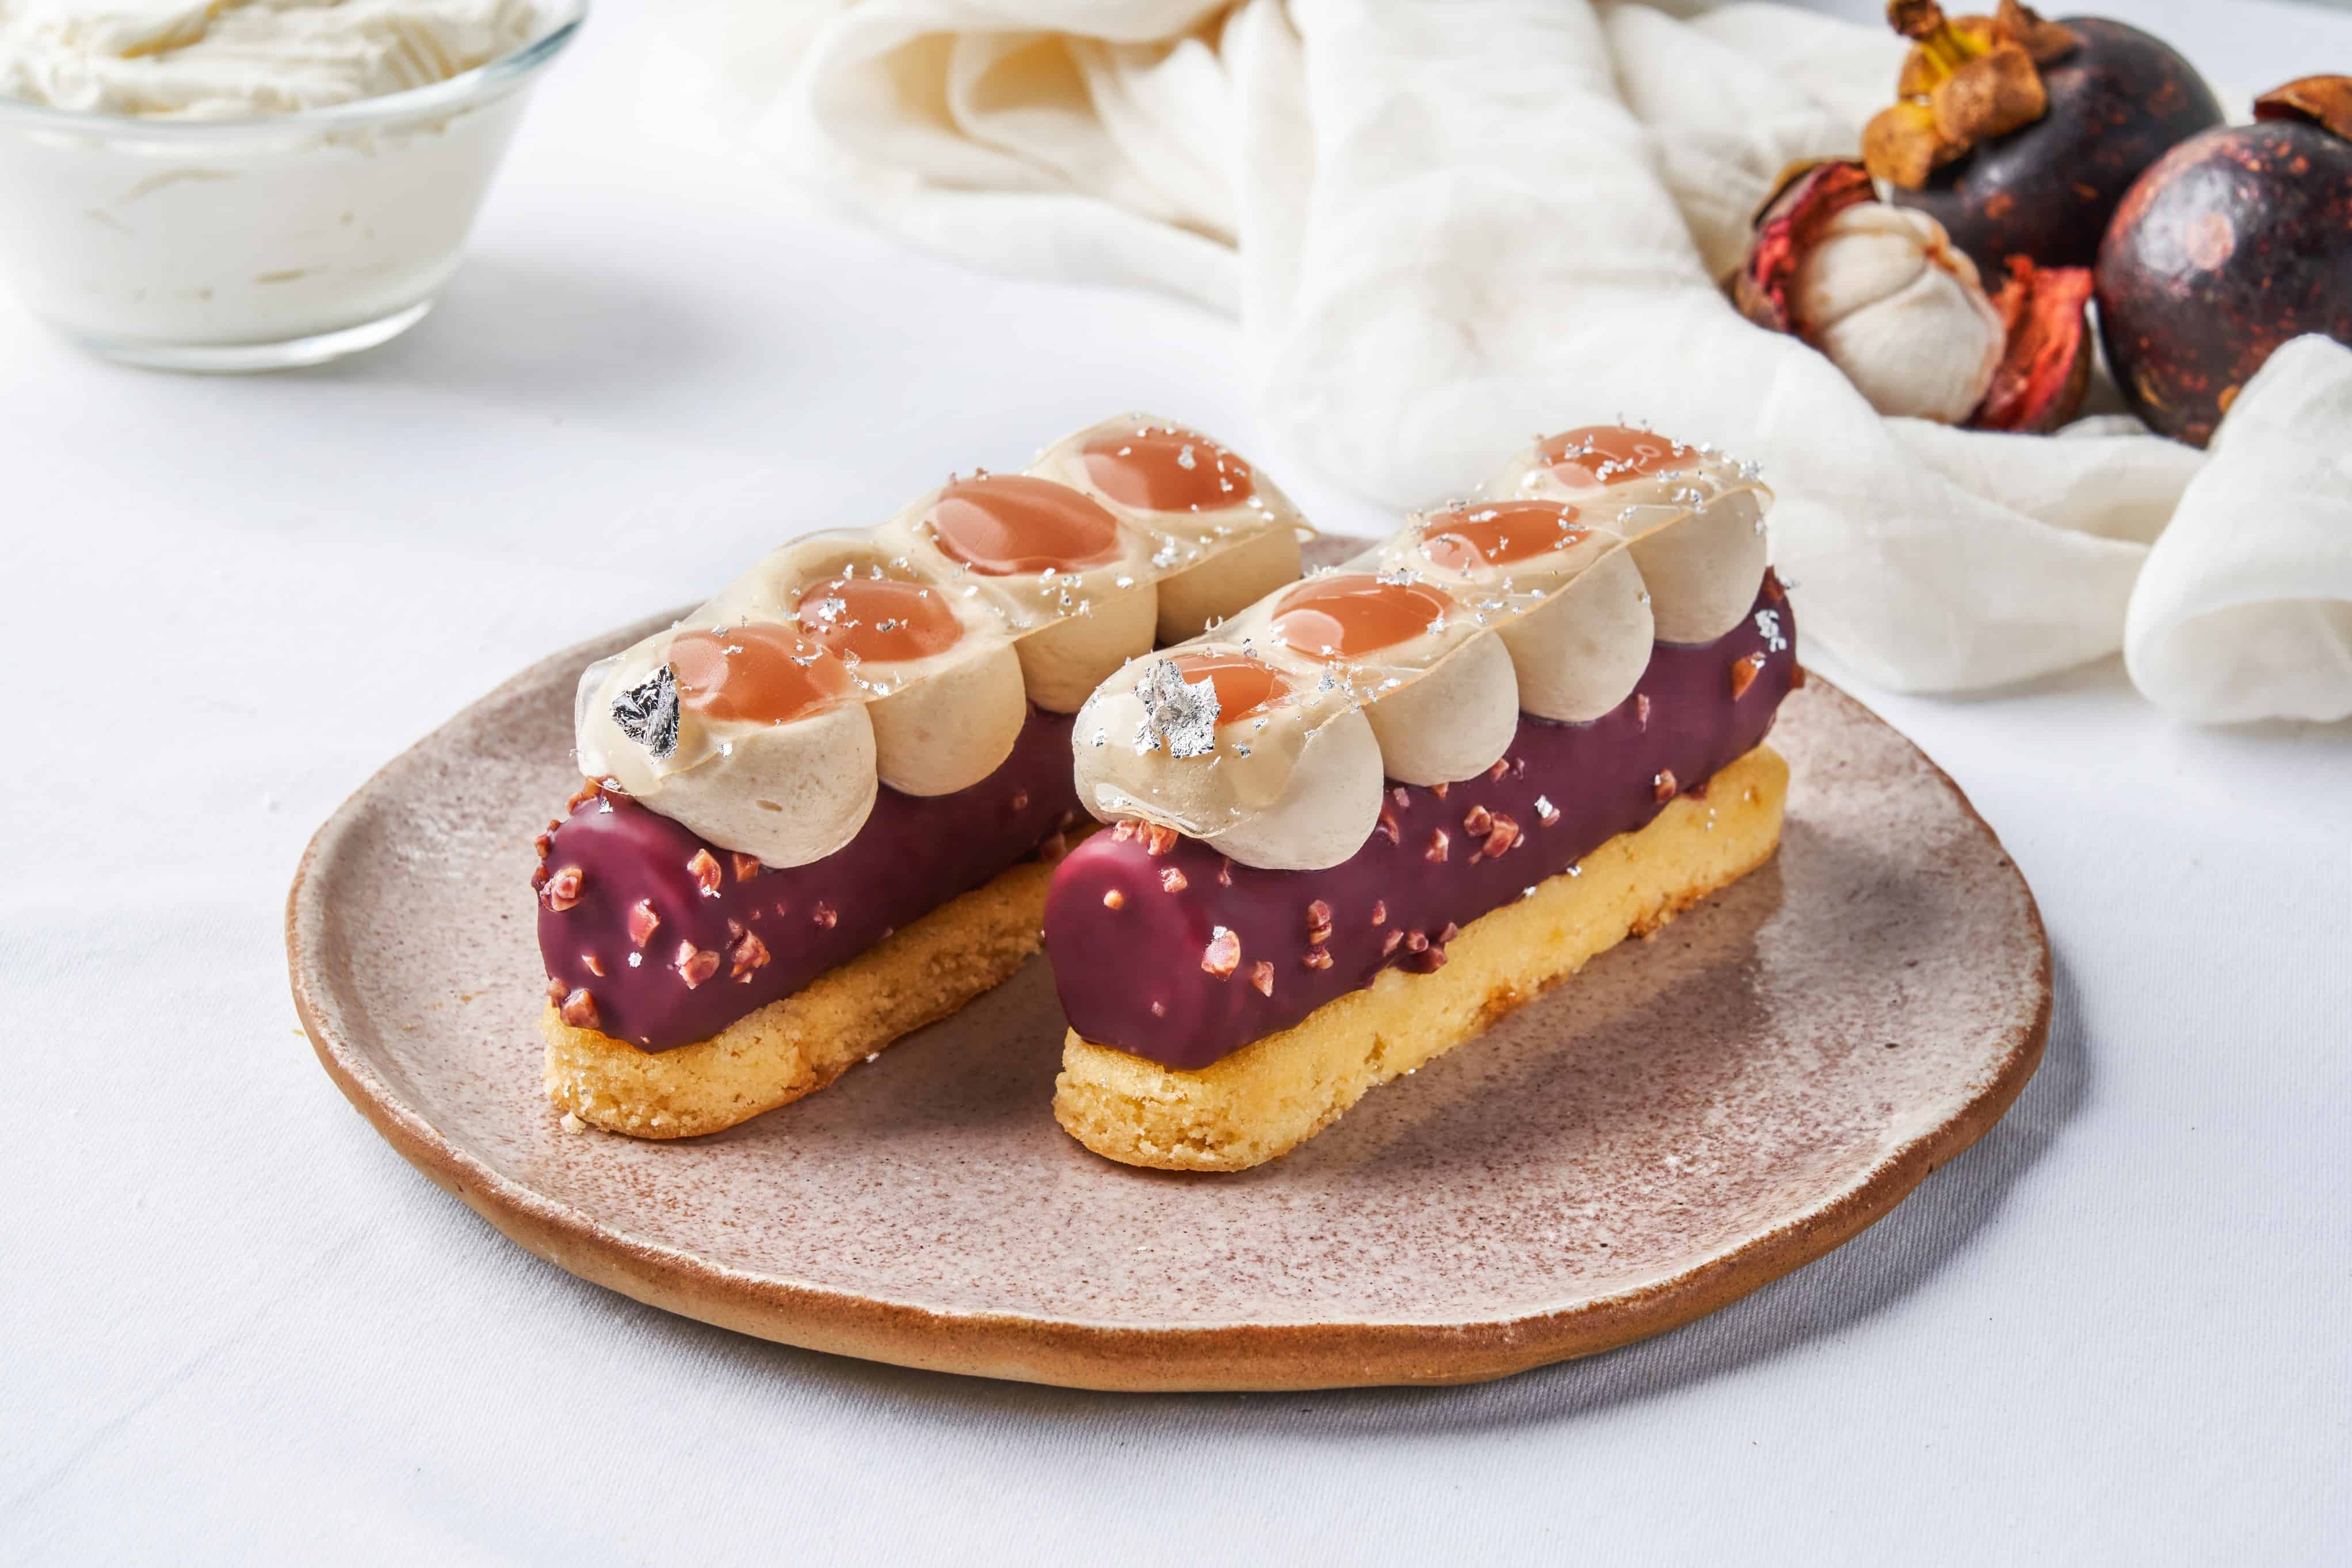 , The Finest Pastries Are Made With French Cream